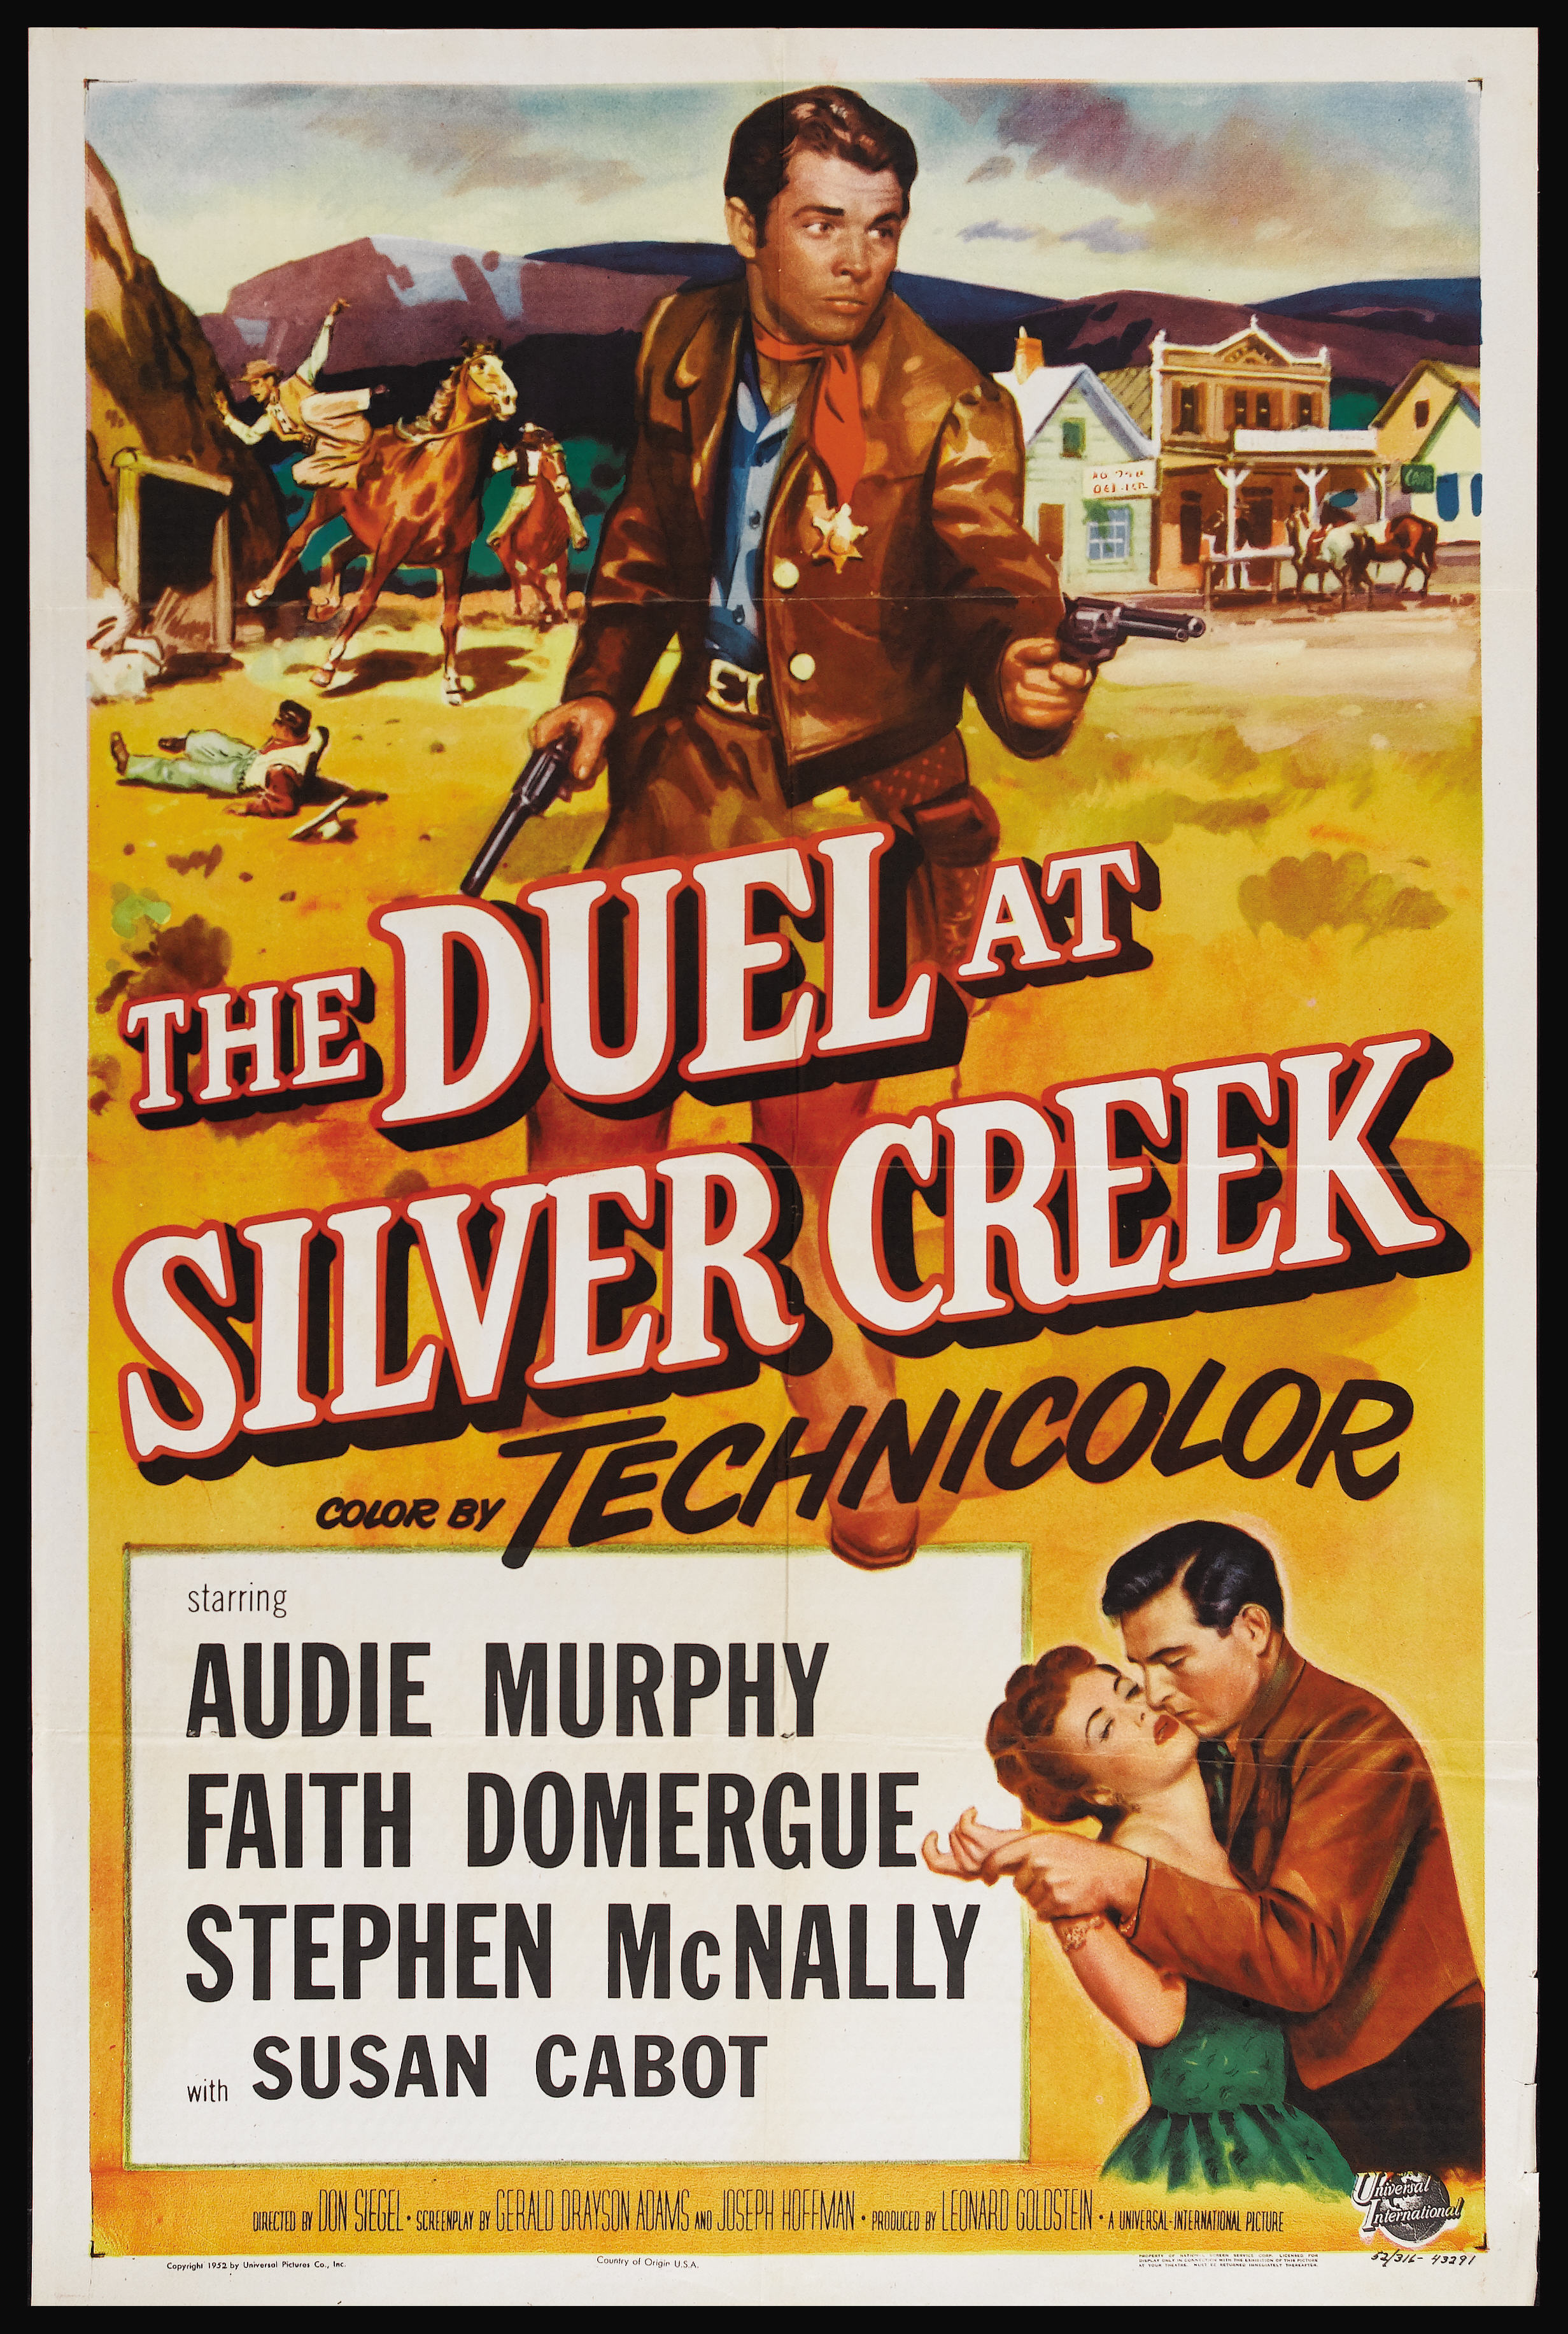 The Duel at Silver Creek [1952]